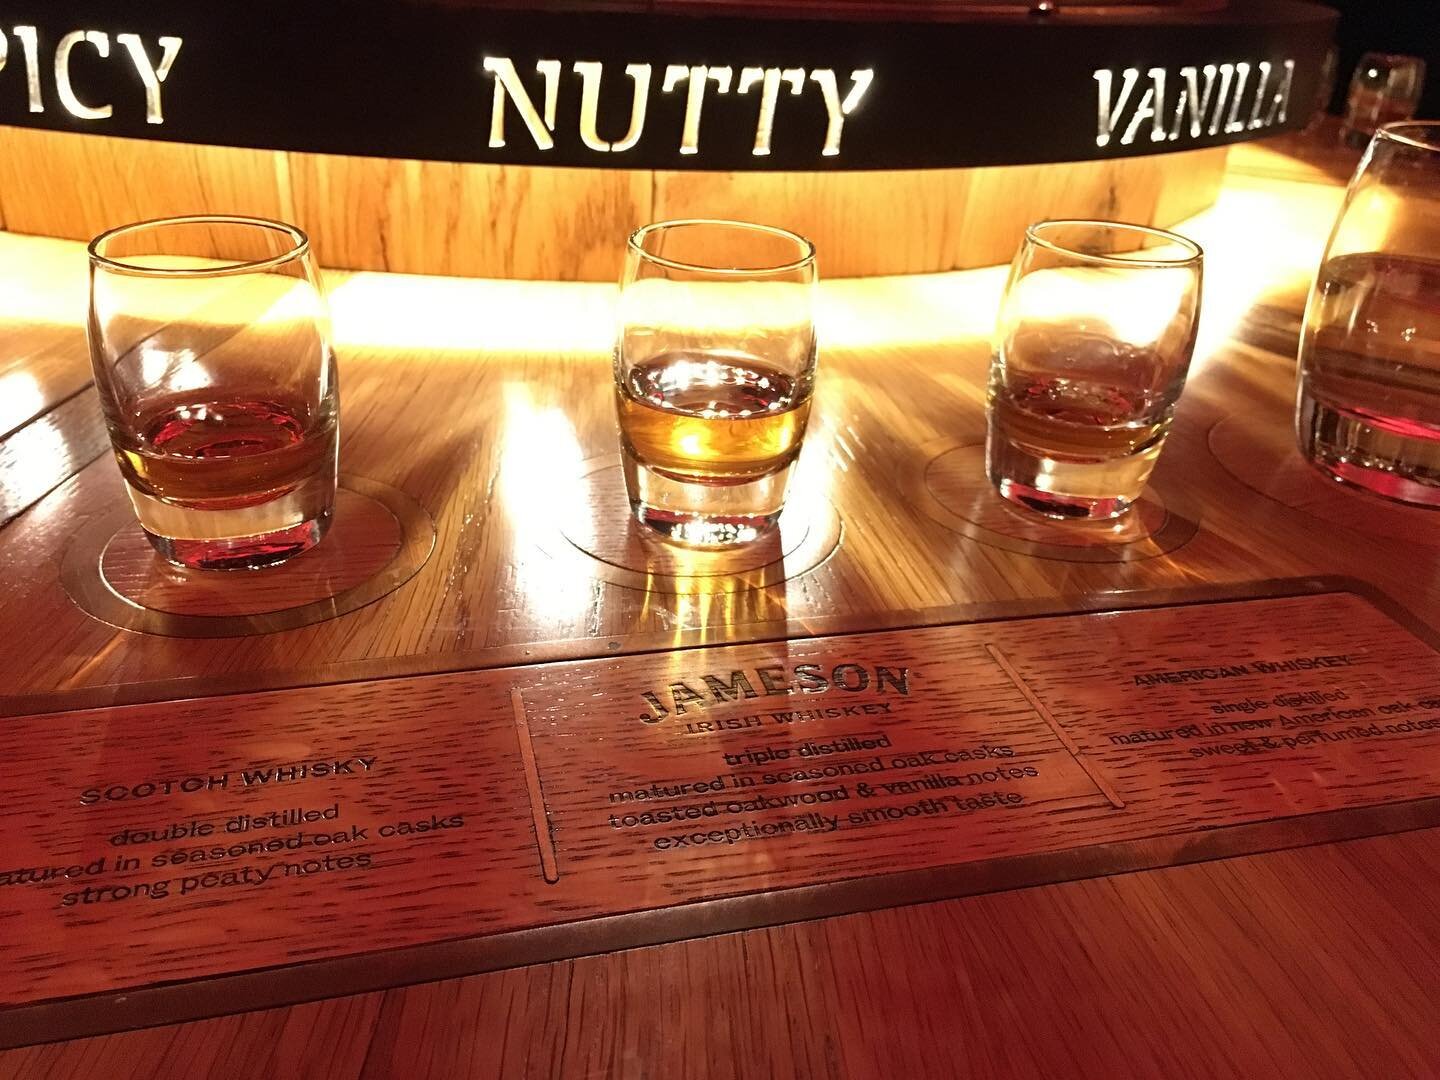 🎉 NEW POST 🎉

Five distilleries in Dublin to visit to taste some authentic Irish whiskey 🥃

Whether you&rsquo;re a fan of whiskey or not, visiting a distillery in Dublin can be a really worthwhile addition to your trip. From the world famous James